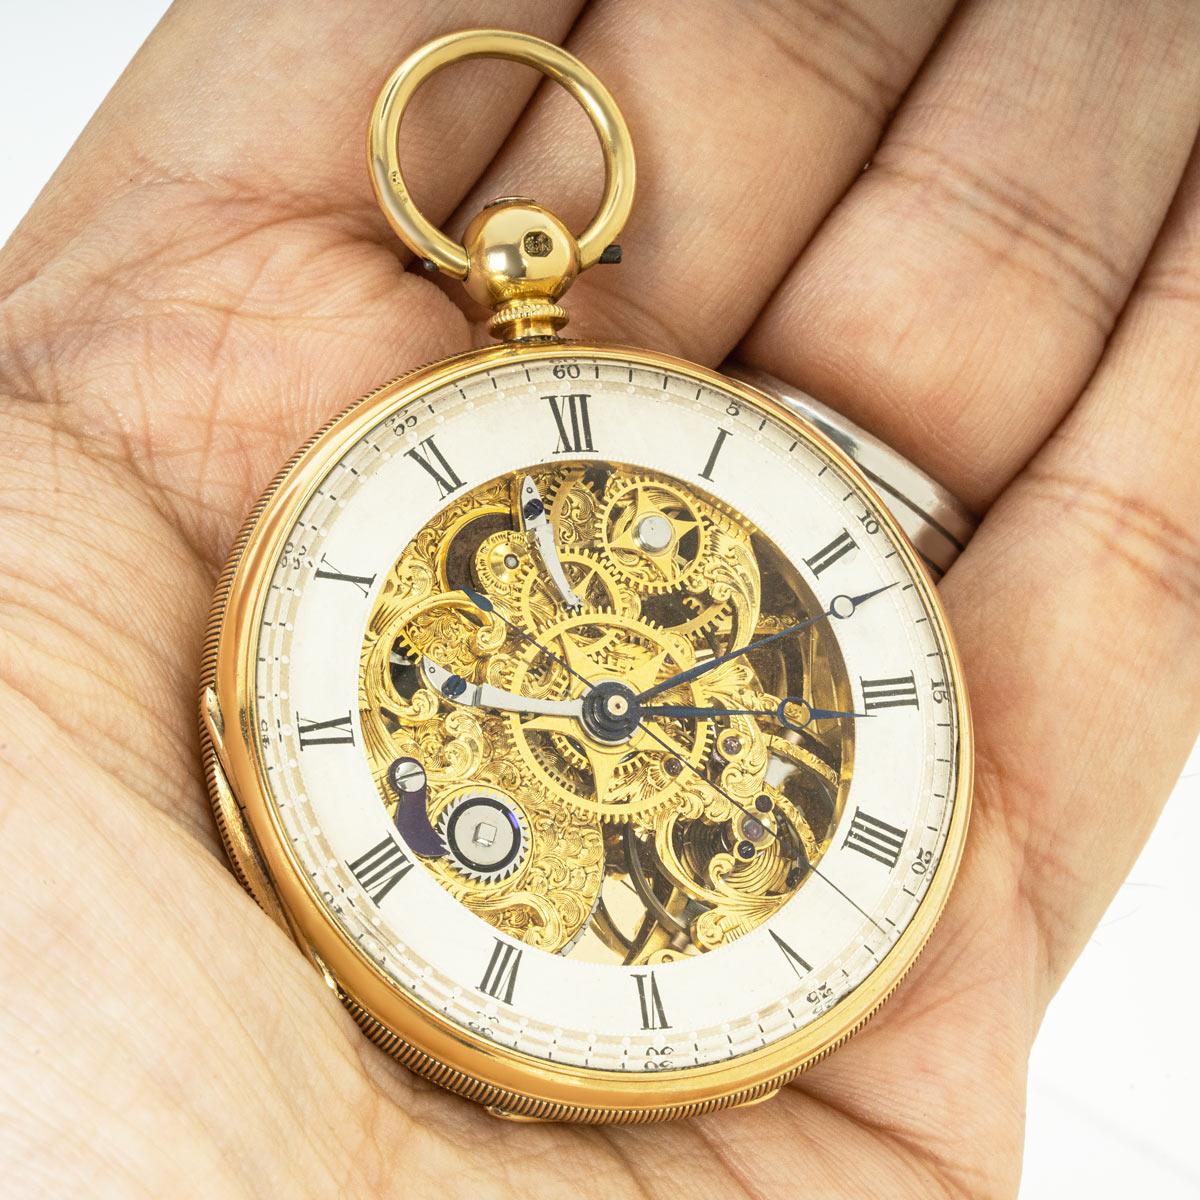 William Wood. A Rare Masonic Skeleton Keywind Fusee Pocket Watch With Royal Provinance C1862

Dial: The silver chapter ring with black Roman numerals and outer minute ring with arabic five minute intervals. The original blued steel moon phase